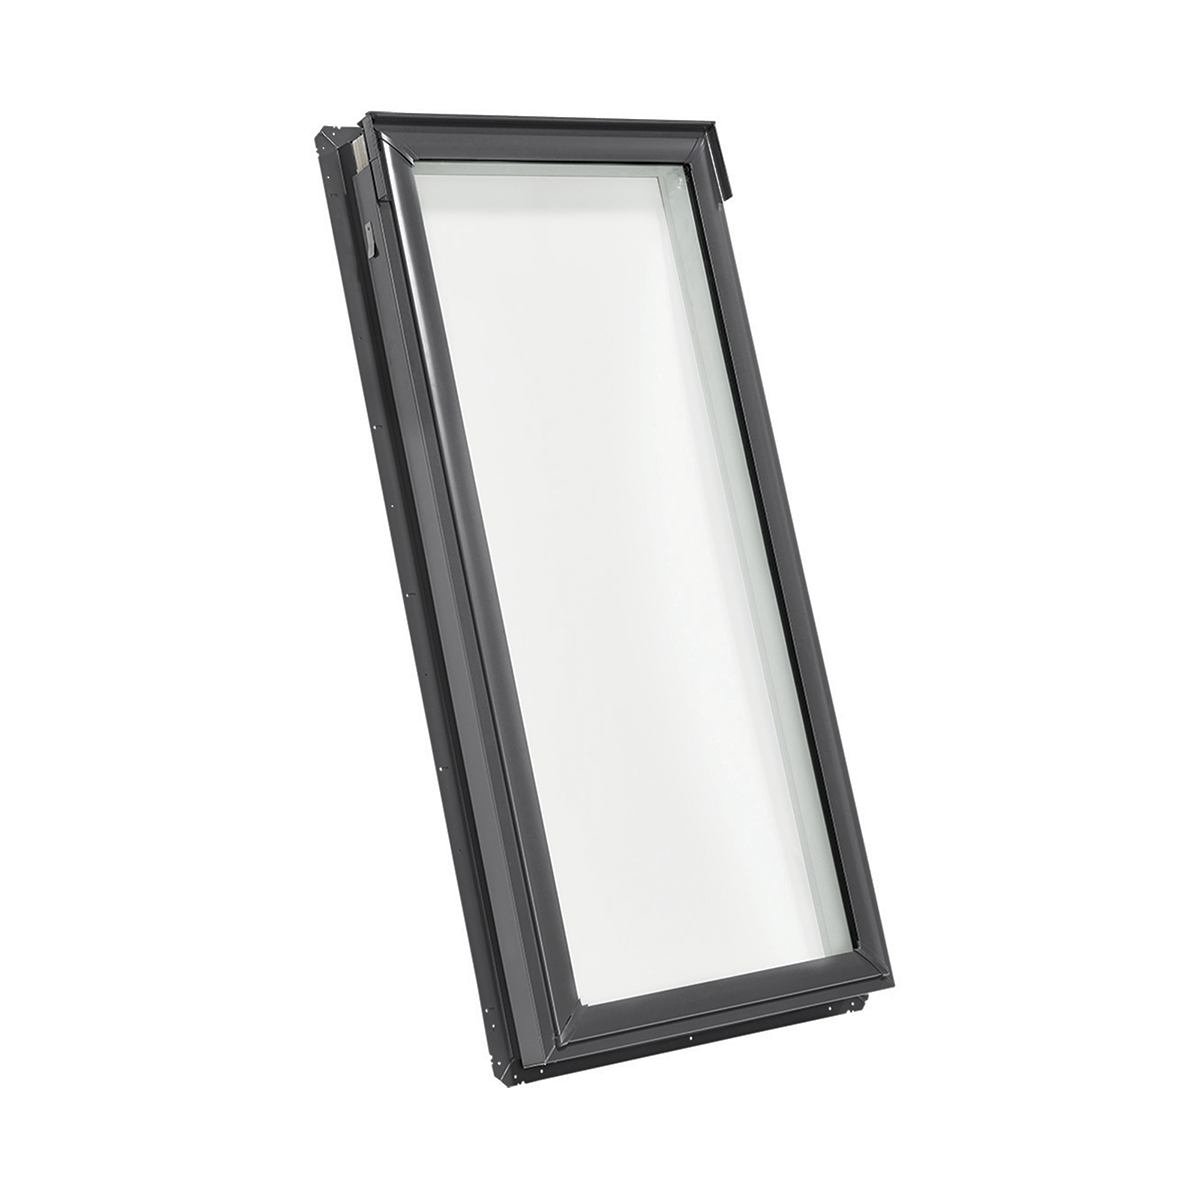 Fixed Deck-Mount Skylight with Laminated Low-E3 Glass - 21 in. x 54-7/16 in. - FS C08